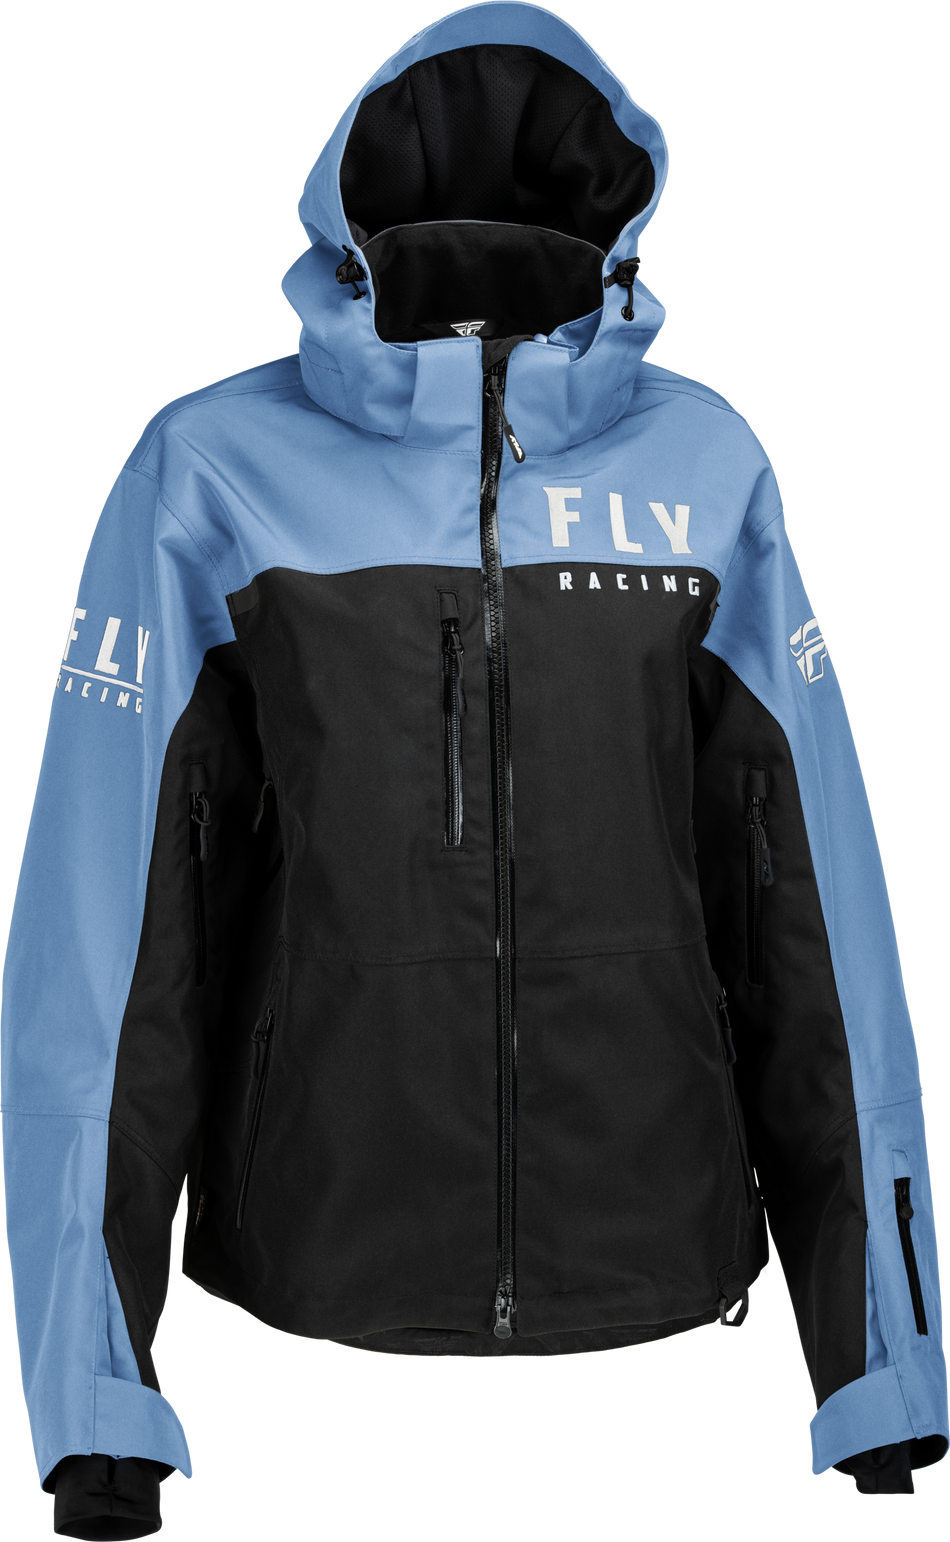 FLY RACING Women's Carbon Jacket Black/Blue Sm 470-4501S